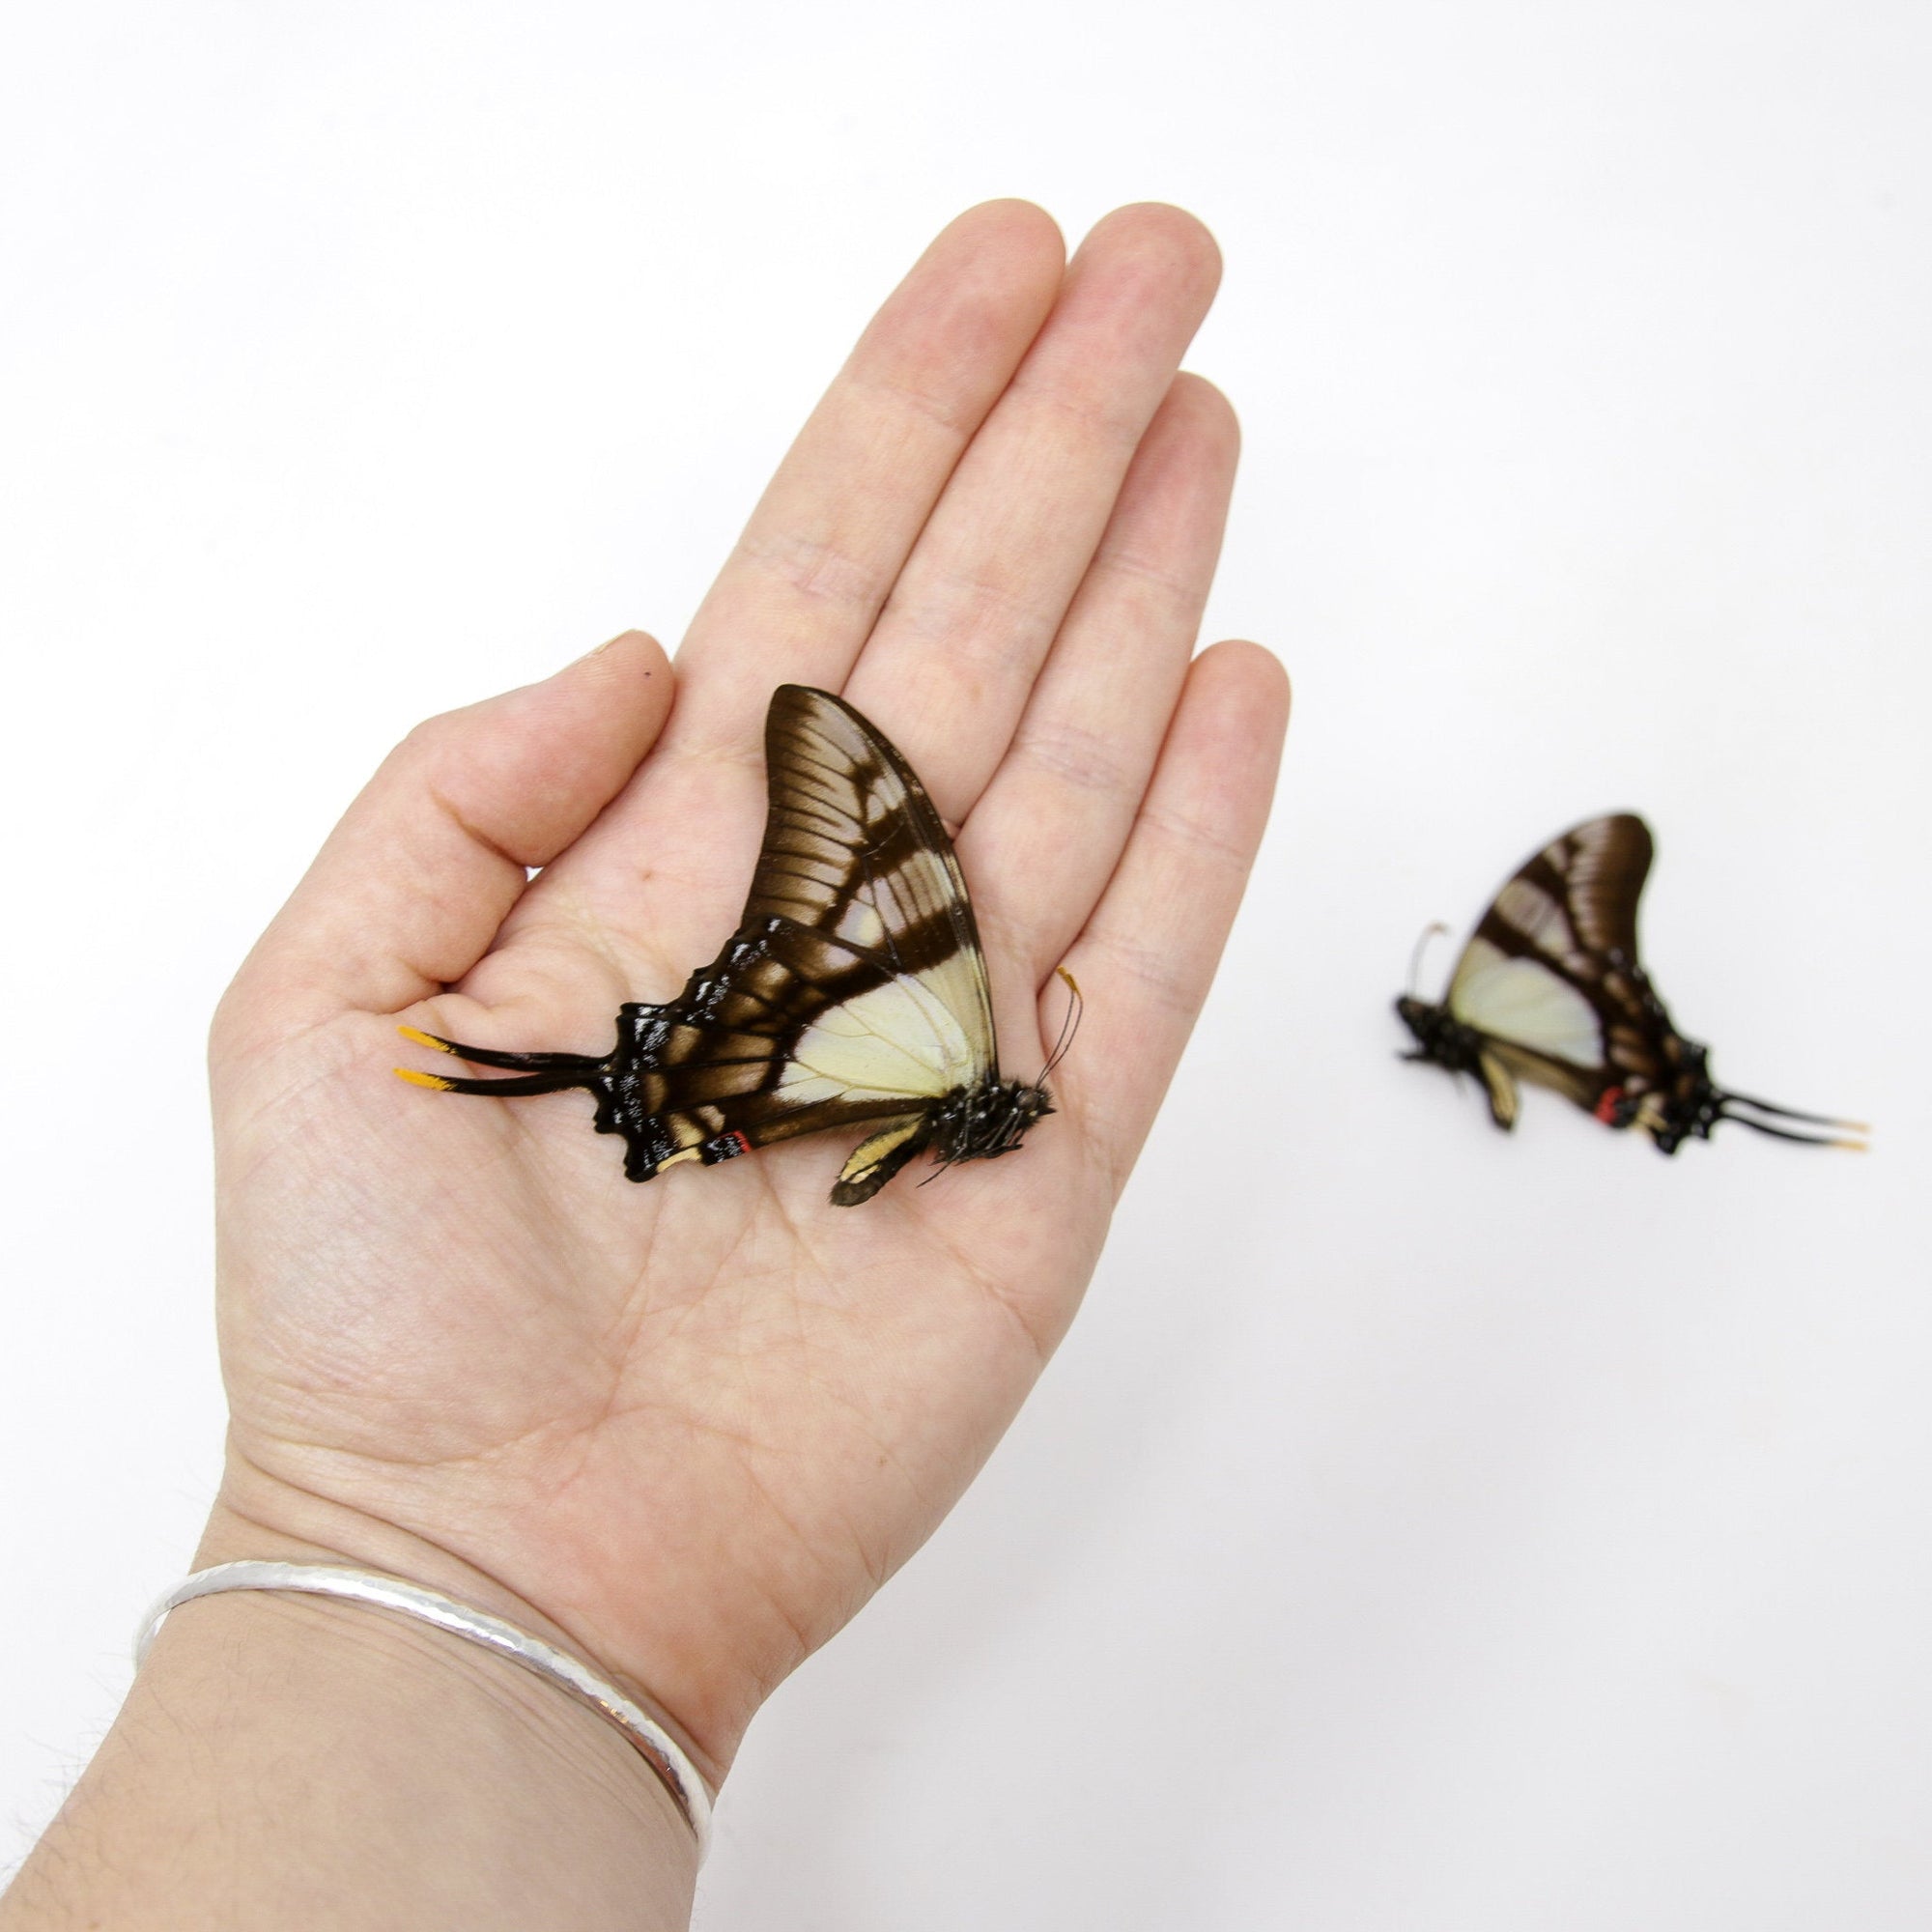 2 x Serville Kite Swallowatil | Eurytides serville | Dry-Preserved Unmounted Butterfly Specimens A1